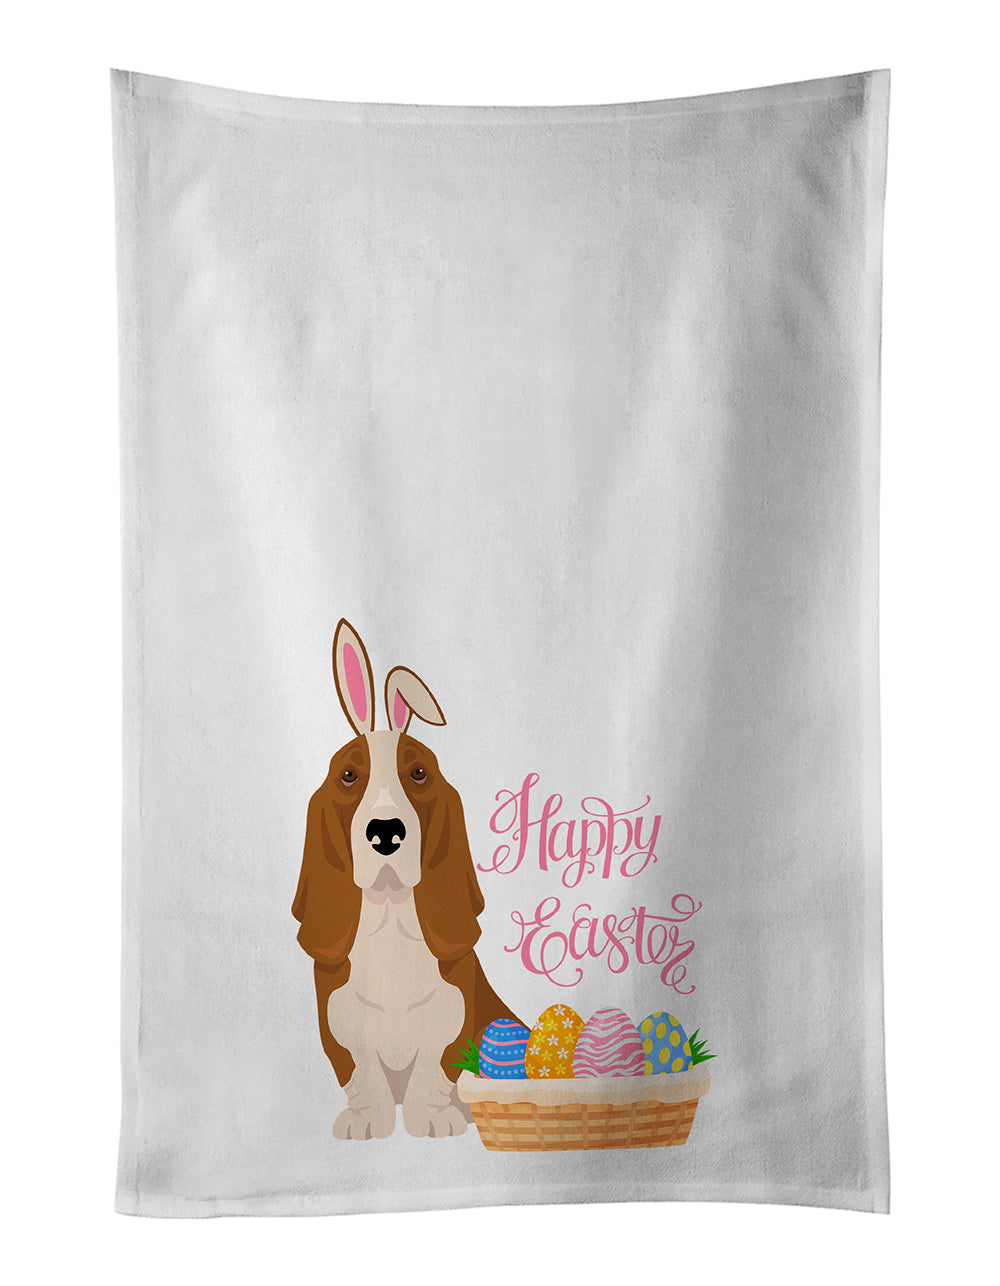 Buy this Red and White Tricolor Basset Hound Easter White Kitchen Towel Set of 2 Dish Towels